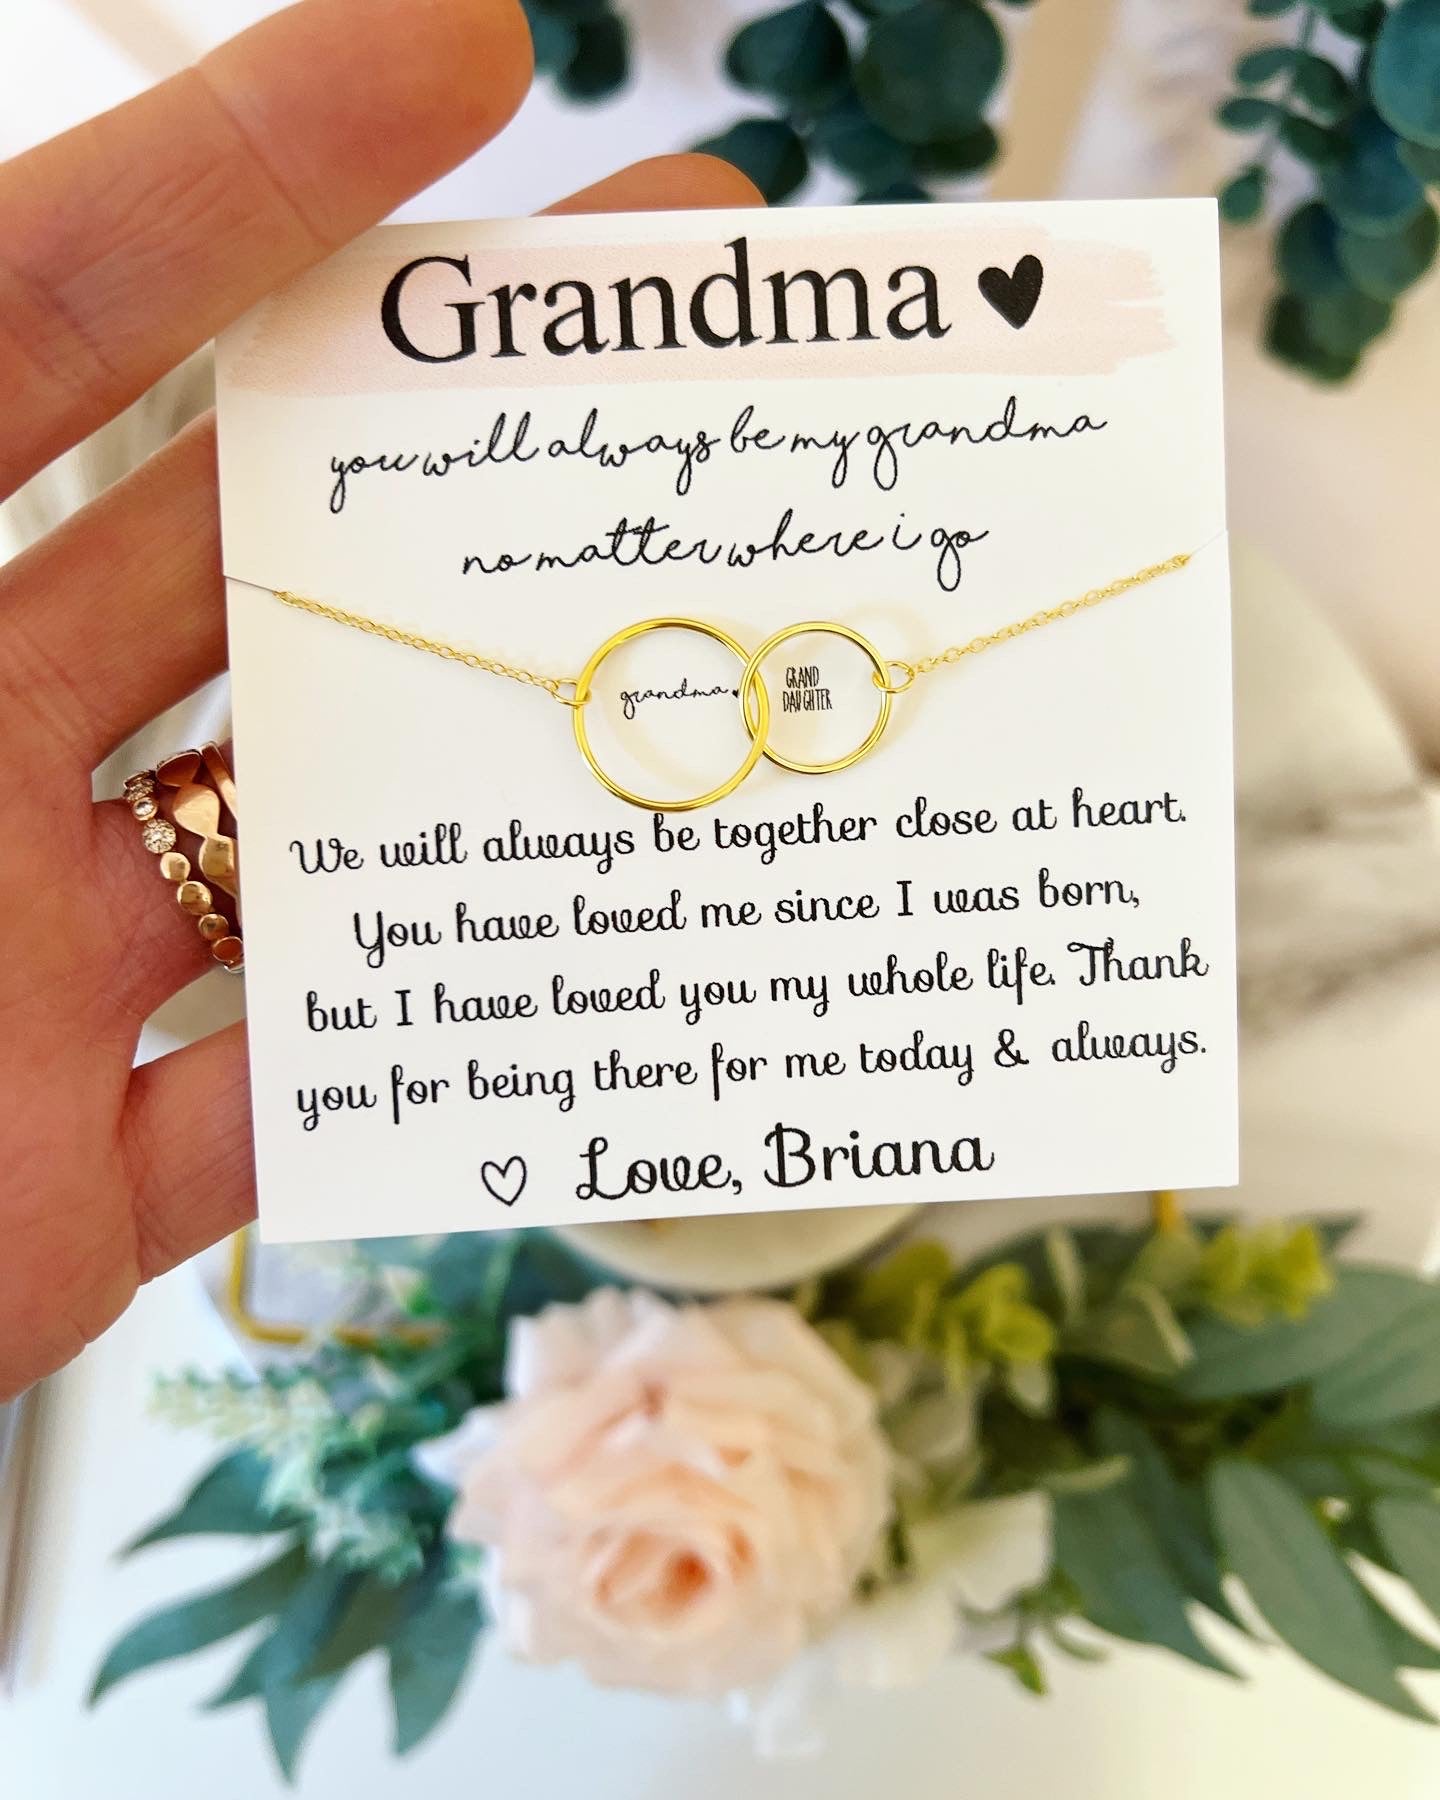 Grandmother Wedding Gift Necklace · Silver, Rose Gold, Gold · Lead & Nickel Free, Hypoallergenic · Box & Ribbon · L: 18 inch · Personalized Card · US